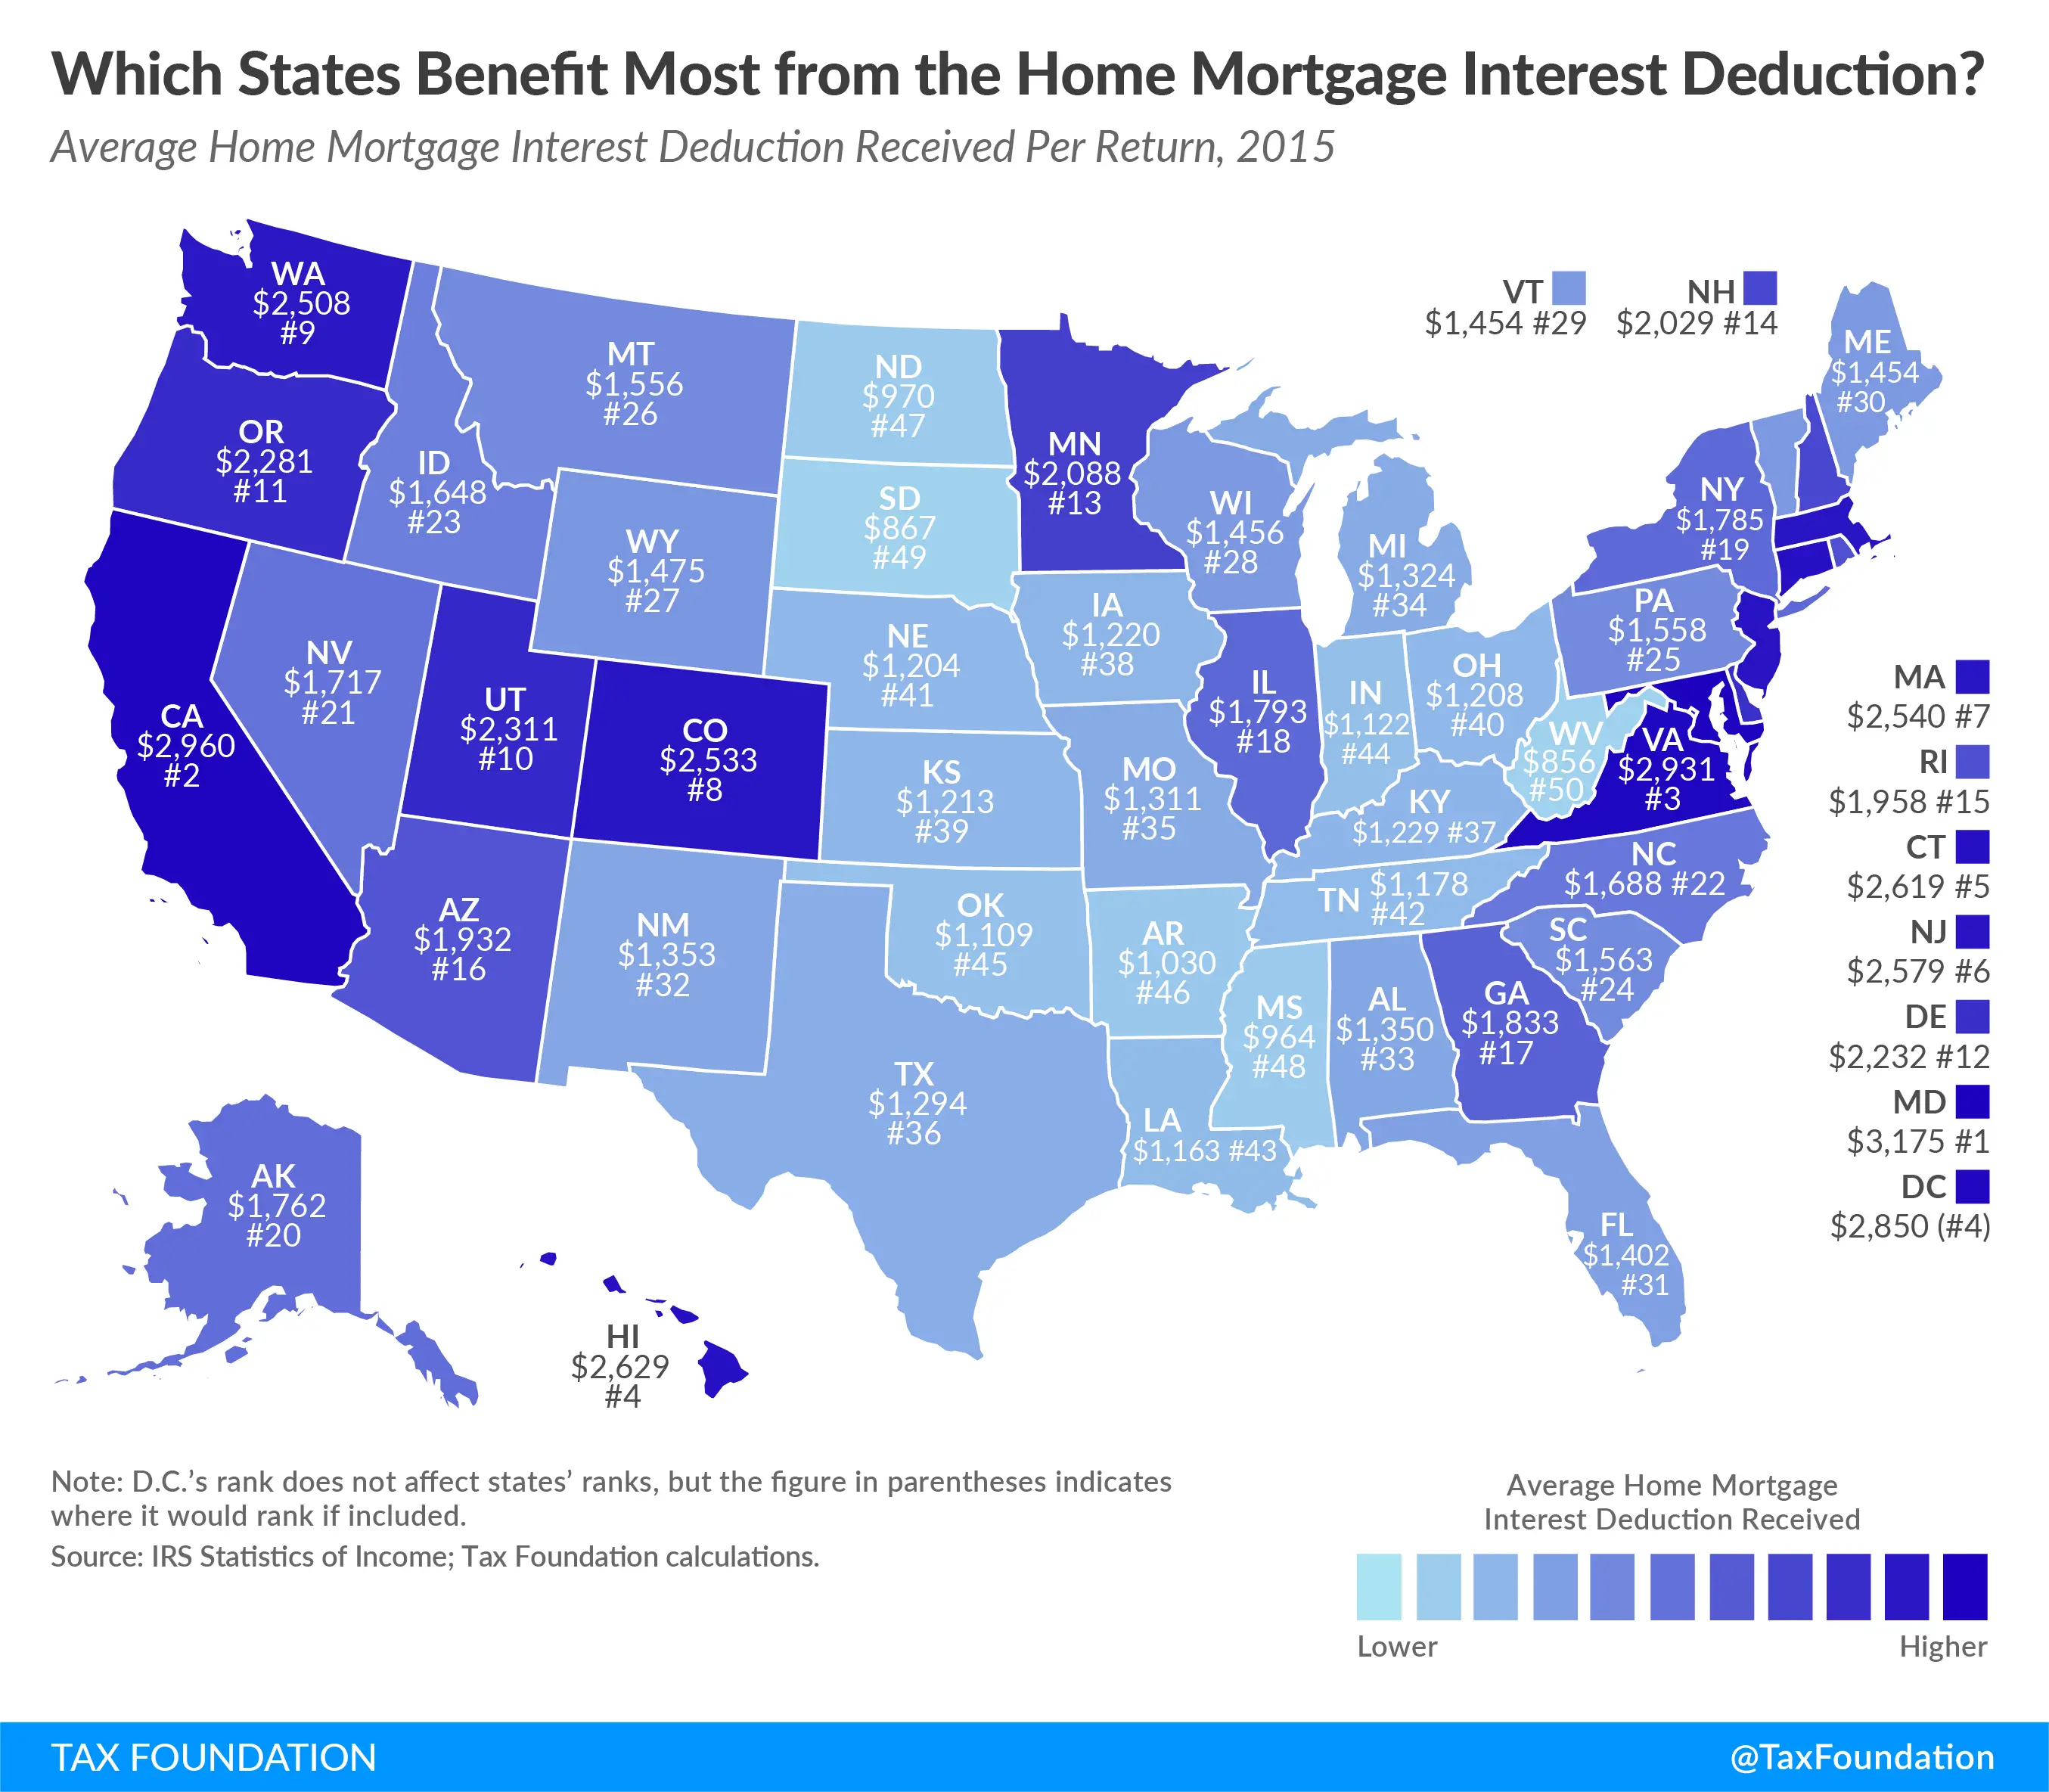 Which States Benefit Most from the Home Mortgage Interest Deduction?